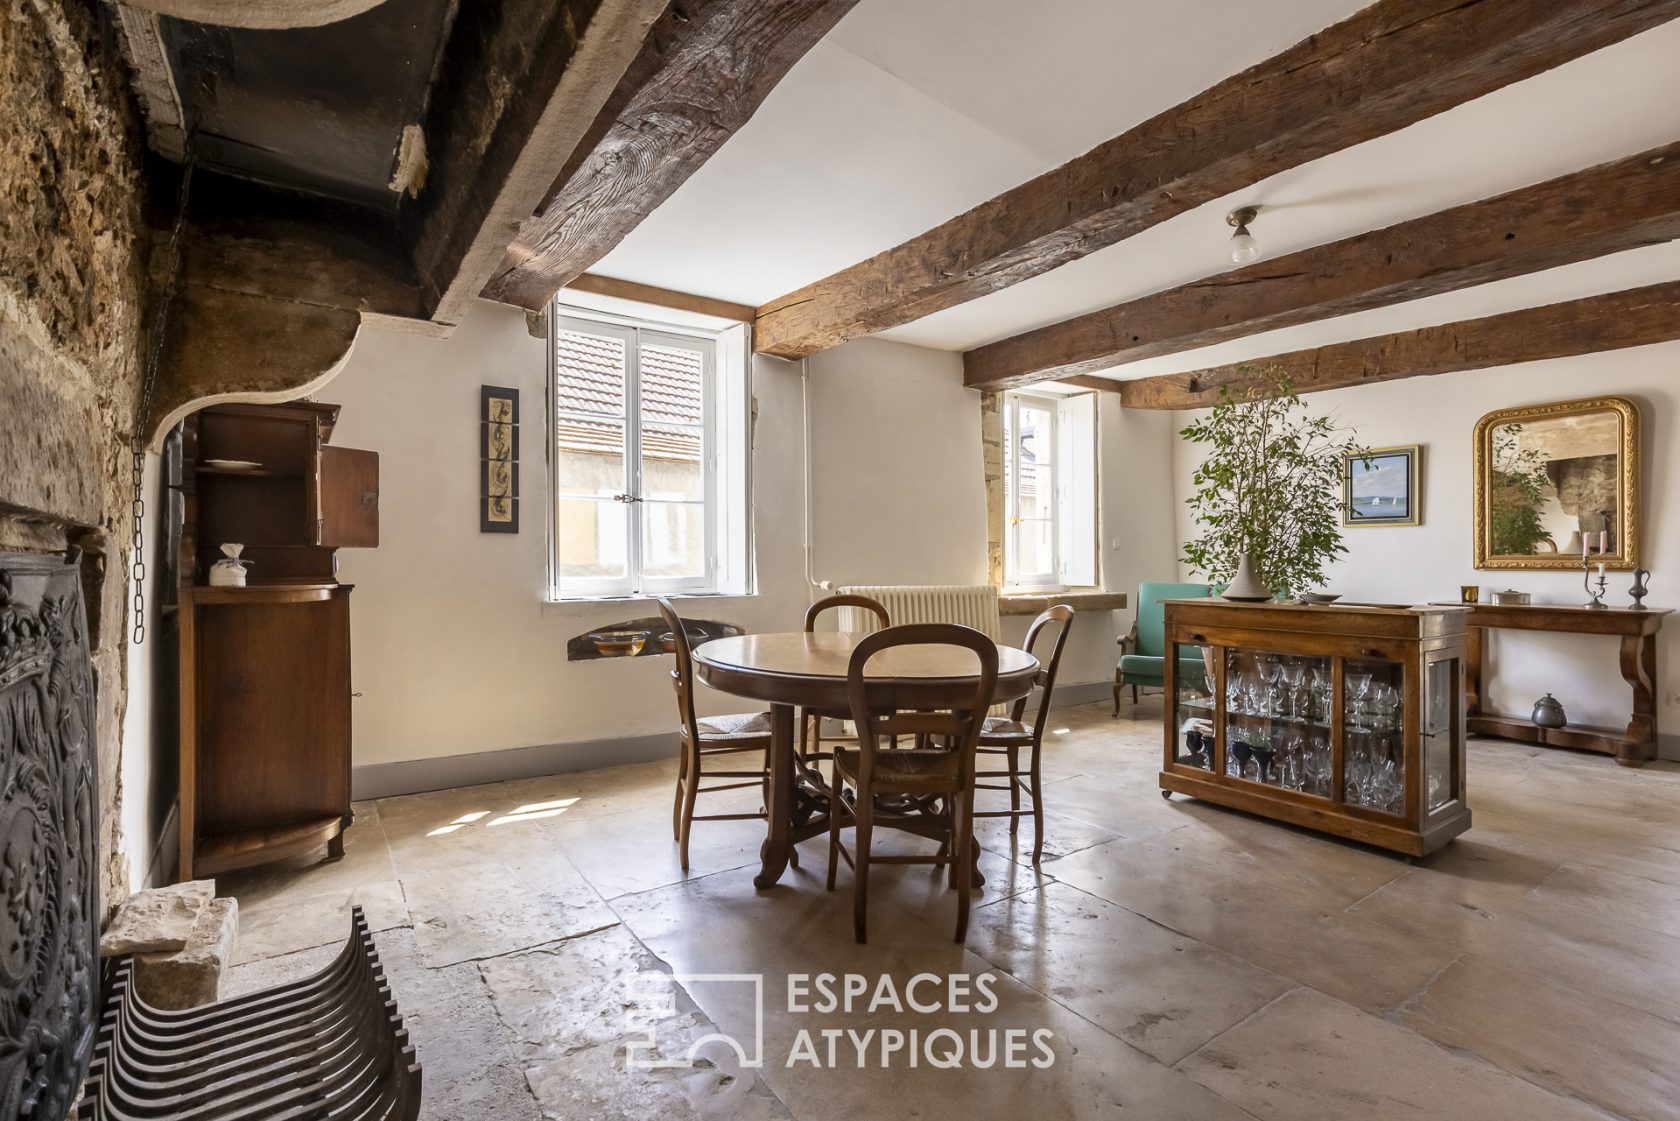 Beautiful 17th century stone property in its 8000sqm park